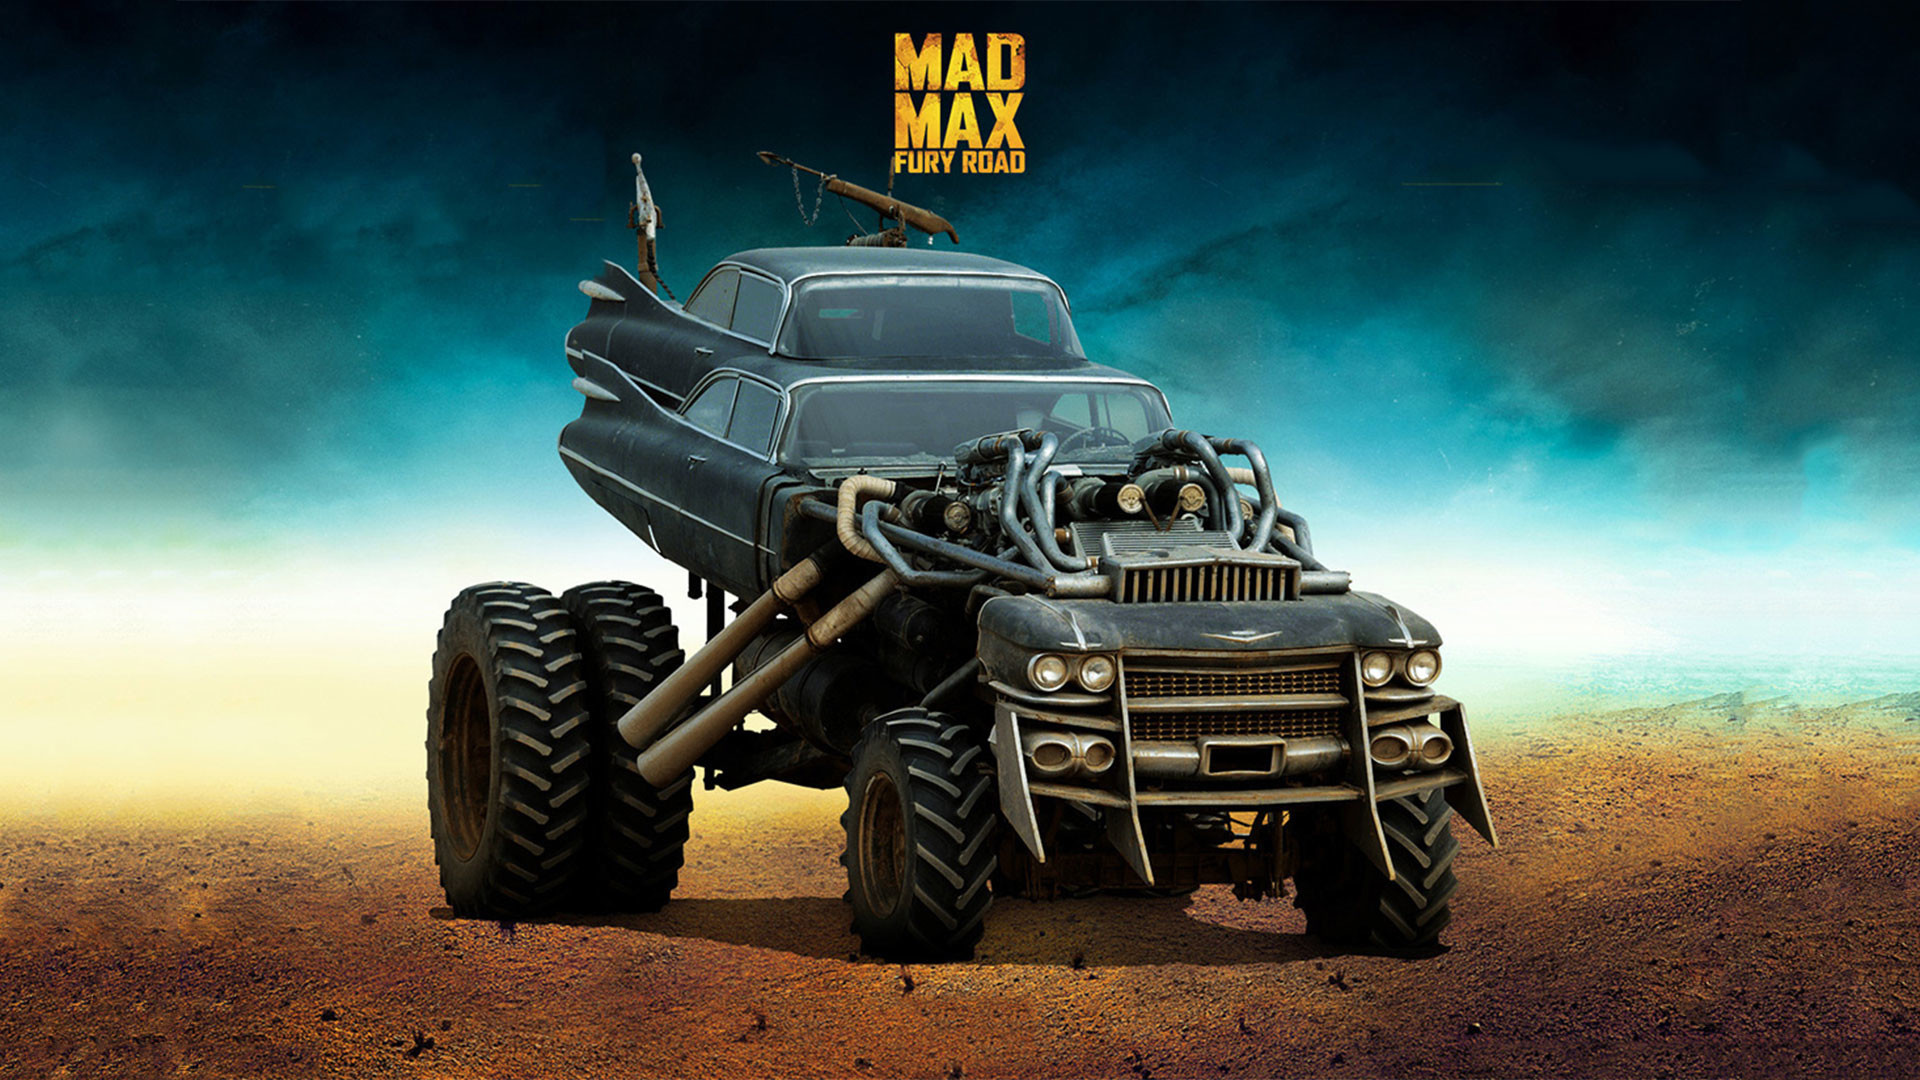 Mad Max: Fury Road: Created and directed by Mad Max franchise author George Miller. 1920x1080 Full HD Wallpaper.